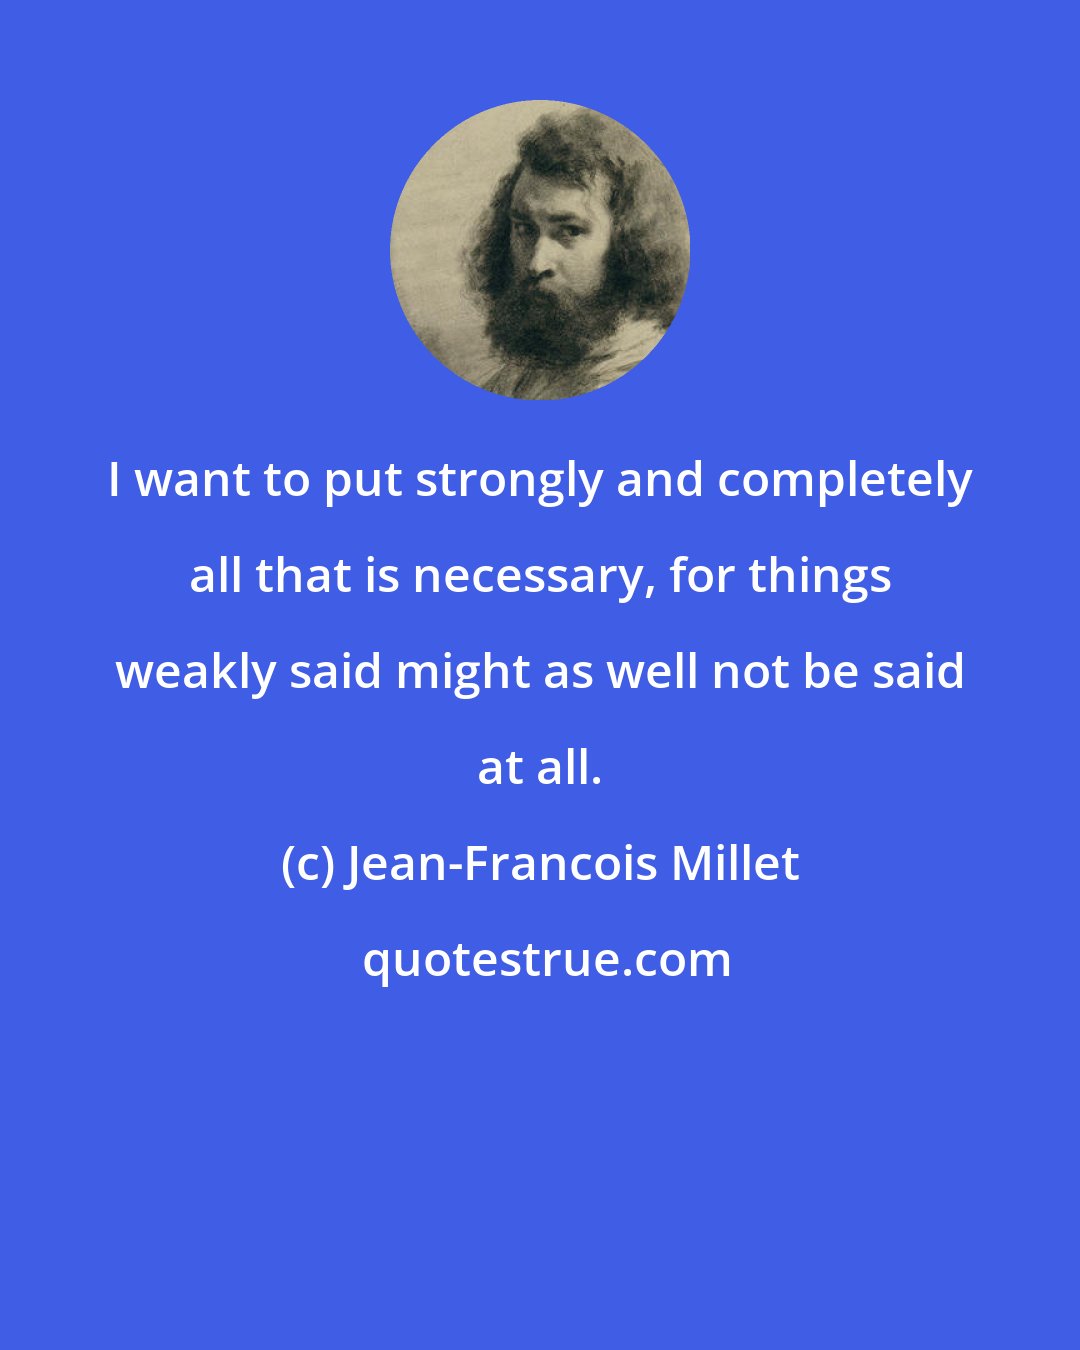 Jean-Francois Millet: I want to put strongly and completely all that is necessary, for things weakly said might as well not be said at all.